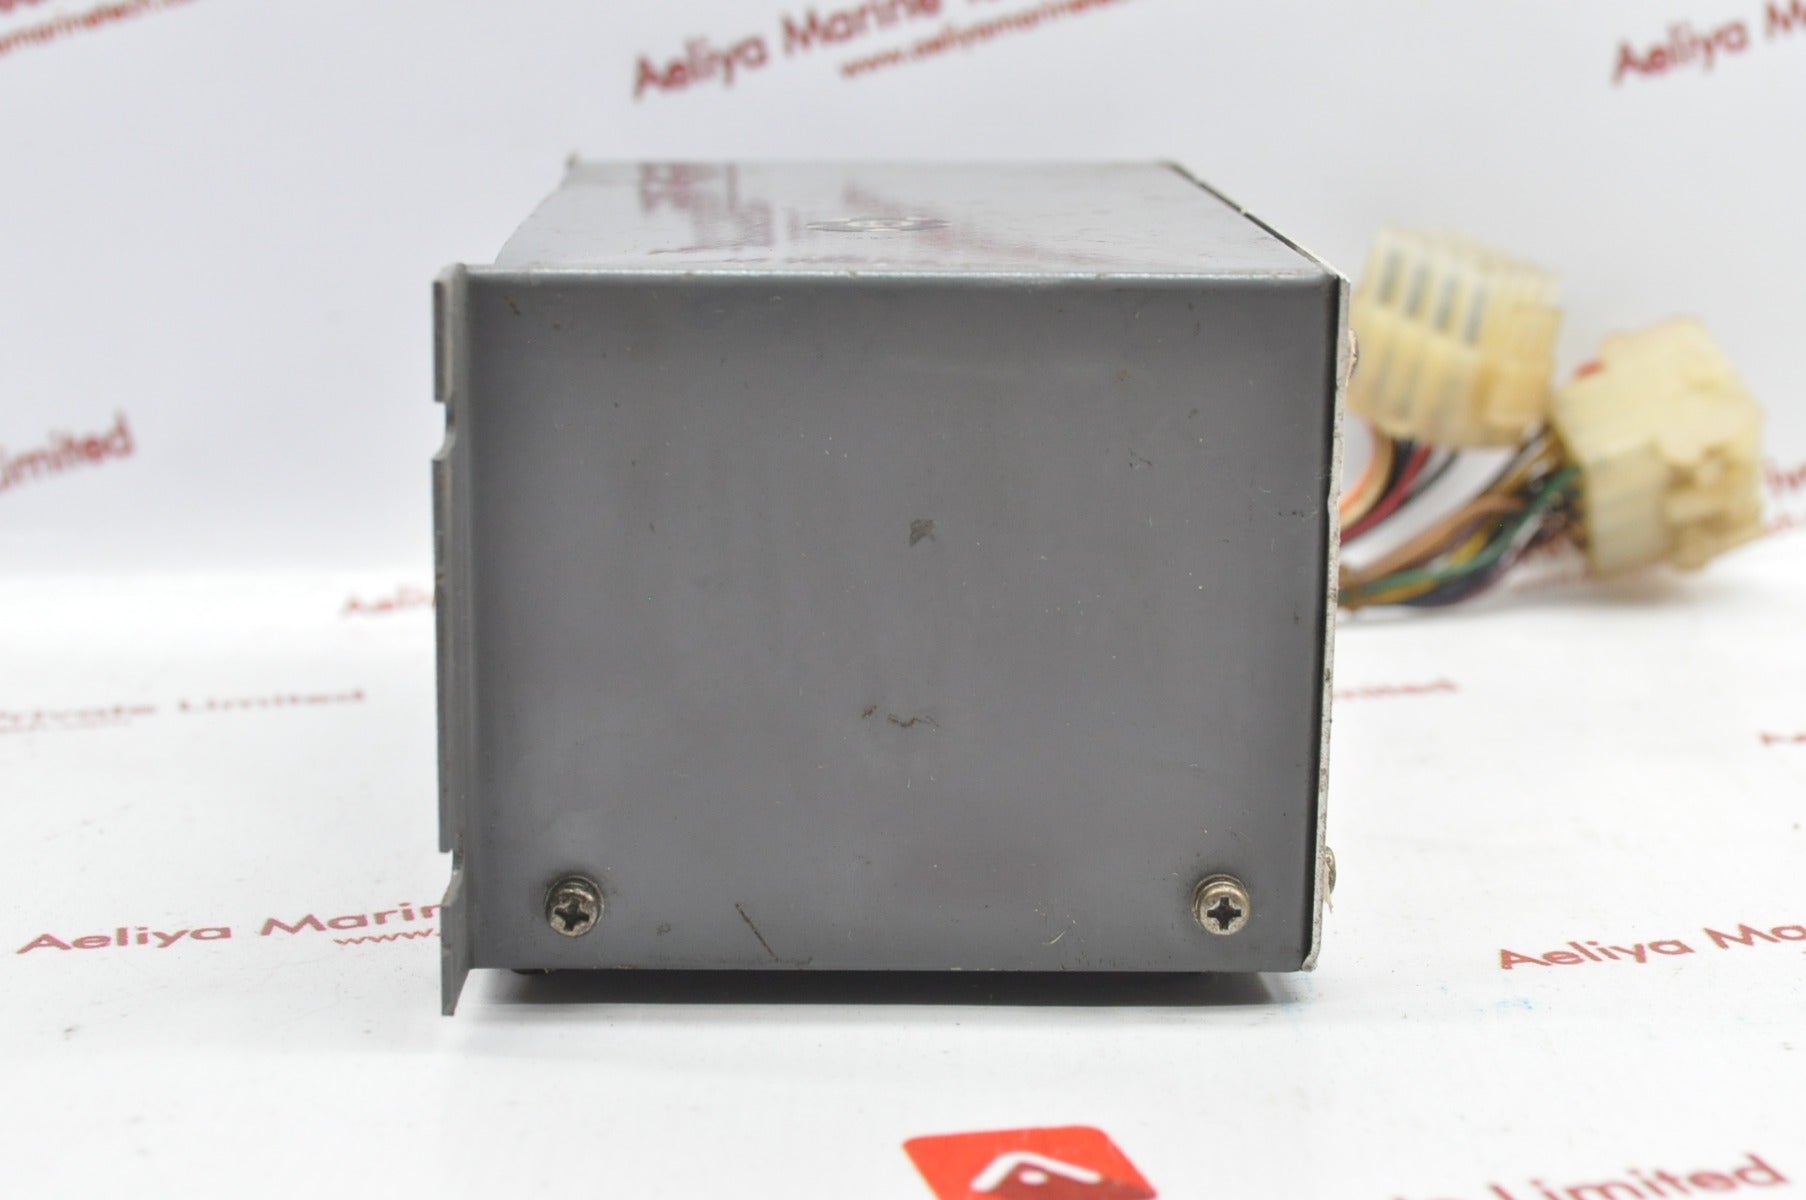 Taiyo Nts-4D-s Starter Solid State Relay